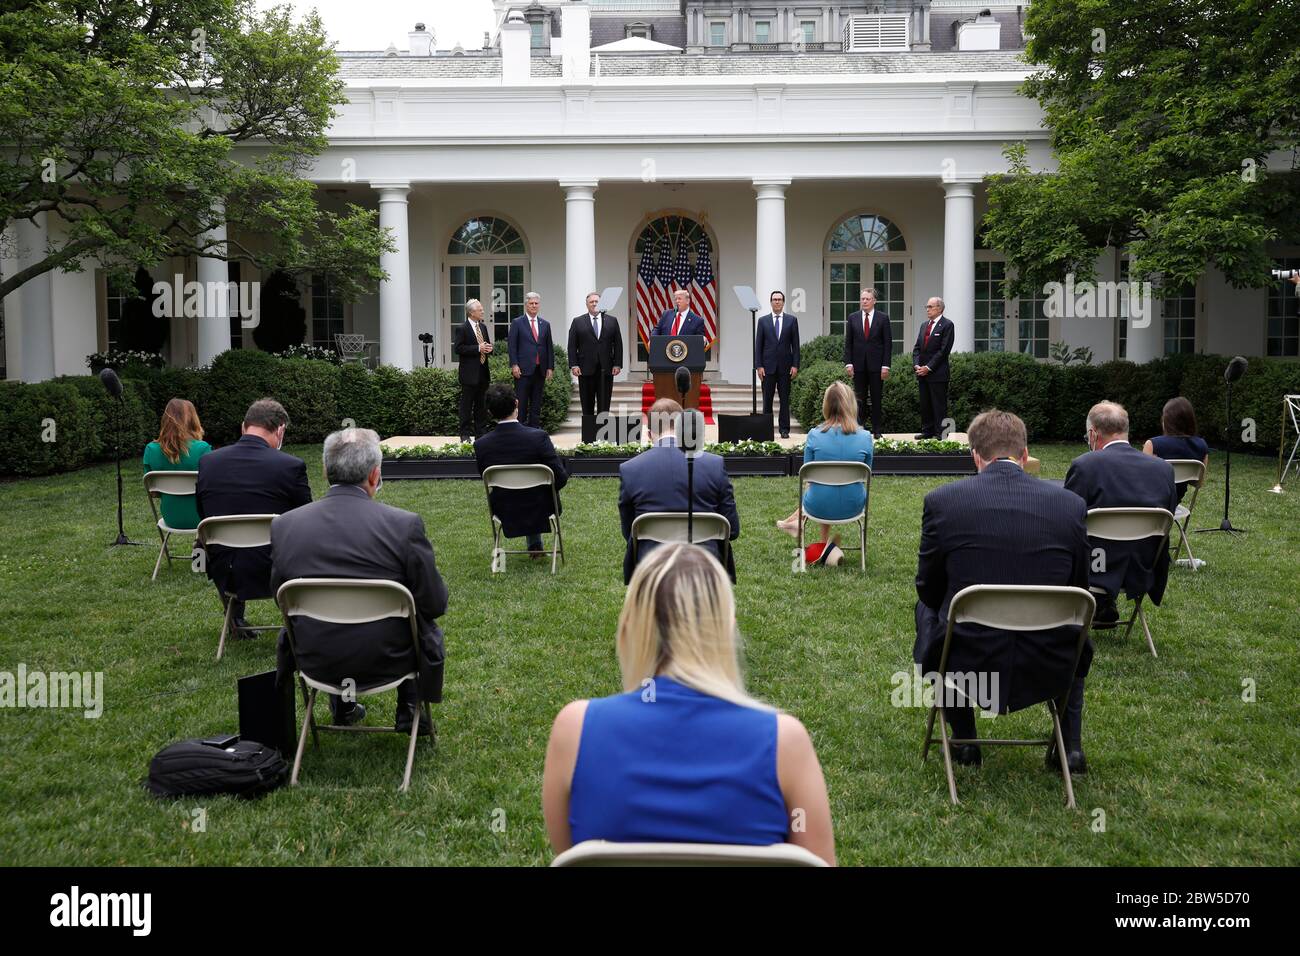 United States President Donald J. Trump with members of his administration delivers remarks on China in the Rose Garden at the White House in Washington, DC on May 29, 2020. Pictured from left to right: Peter Navarro, Director of Trade and Industrial Policy and Director of the White House National Trade Council; US National Security Advisor Robert C. O'Brien; US Secretary of State Mike Pompeo; the president; US Secretary of the Treasury Steven T. Mnuchin; Ambassador Robert Lighthizer, US Trade Representative; and Director of the National Economic Council Larry Kudlow.Credit: Yuri Gripas/Poo Stock Photo